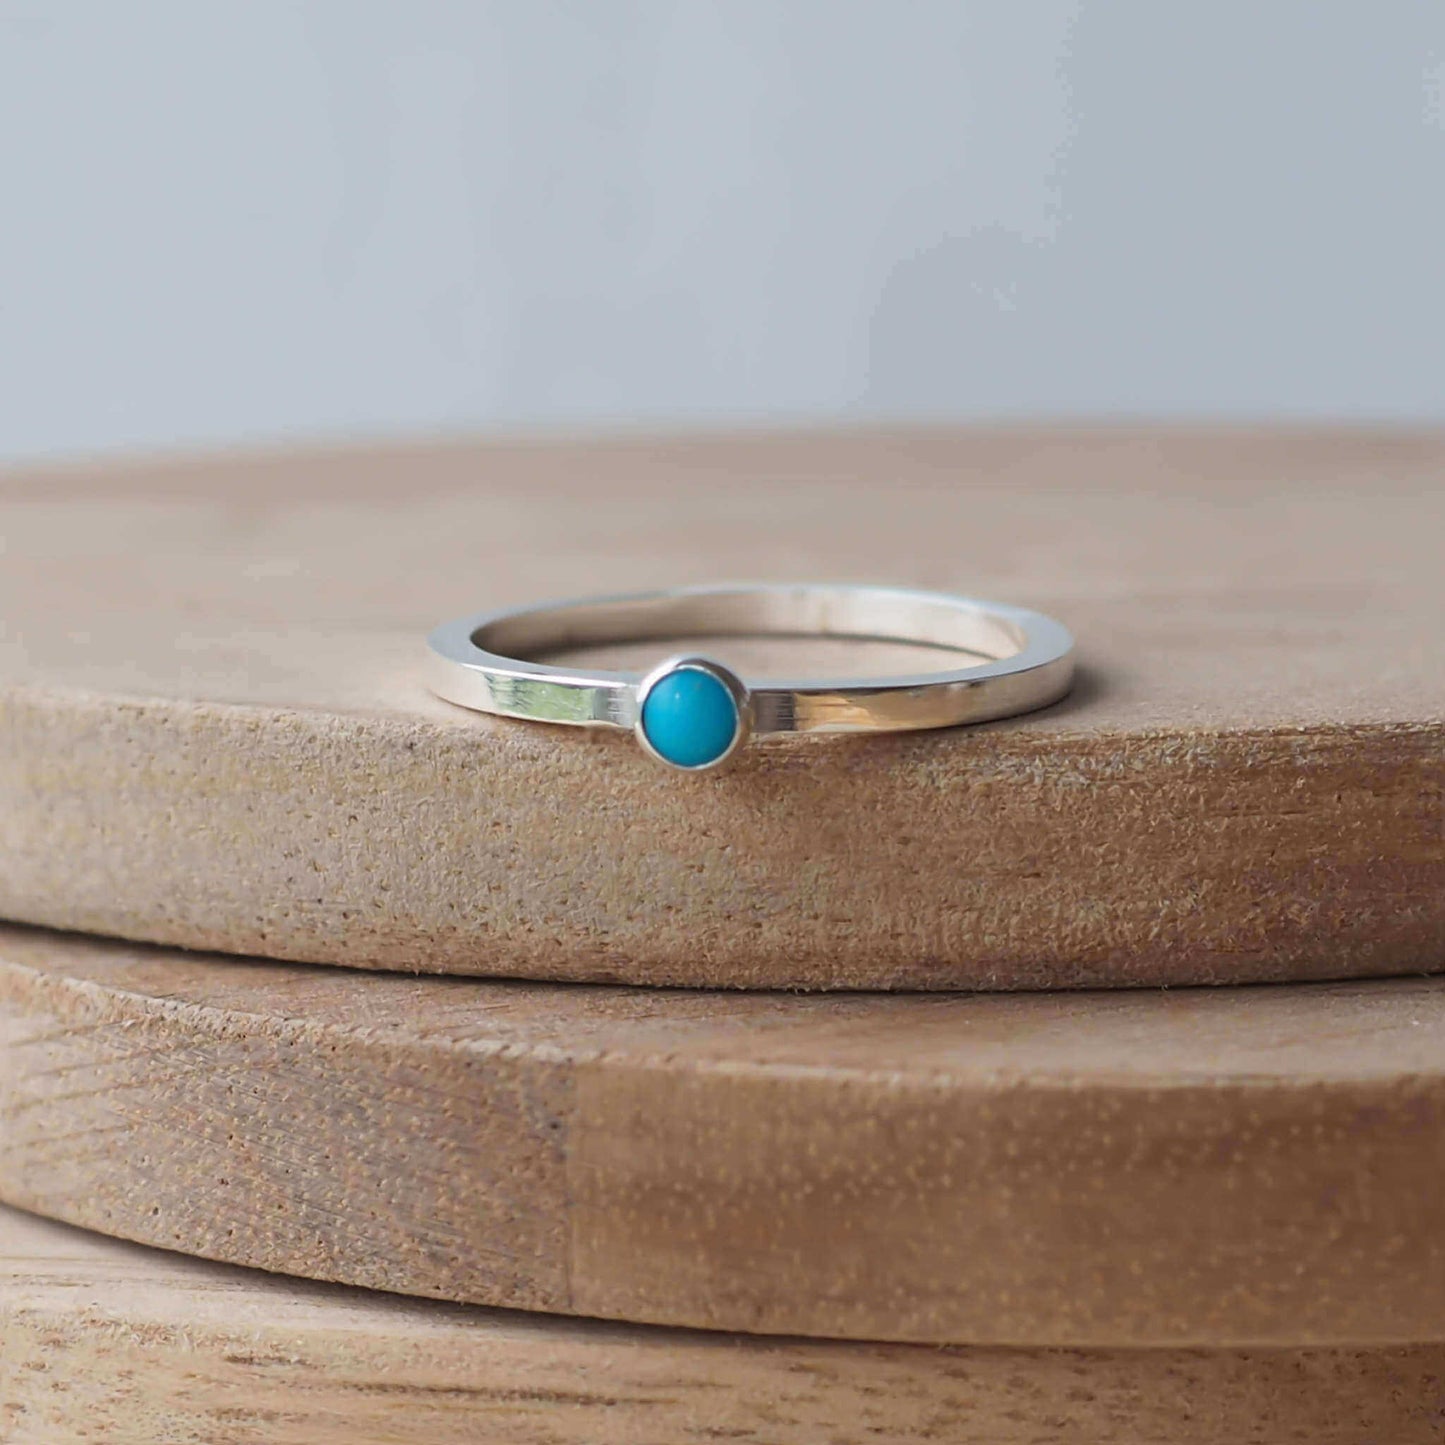 Modern Sterling Silver and small gemstone Turquoise Ring. Handmade in Scotland by maram jewellery